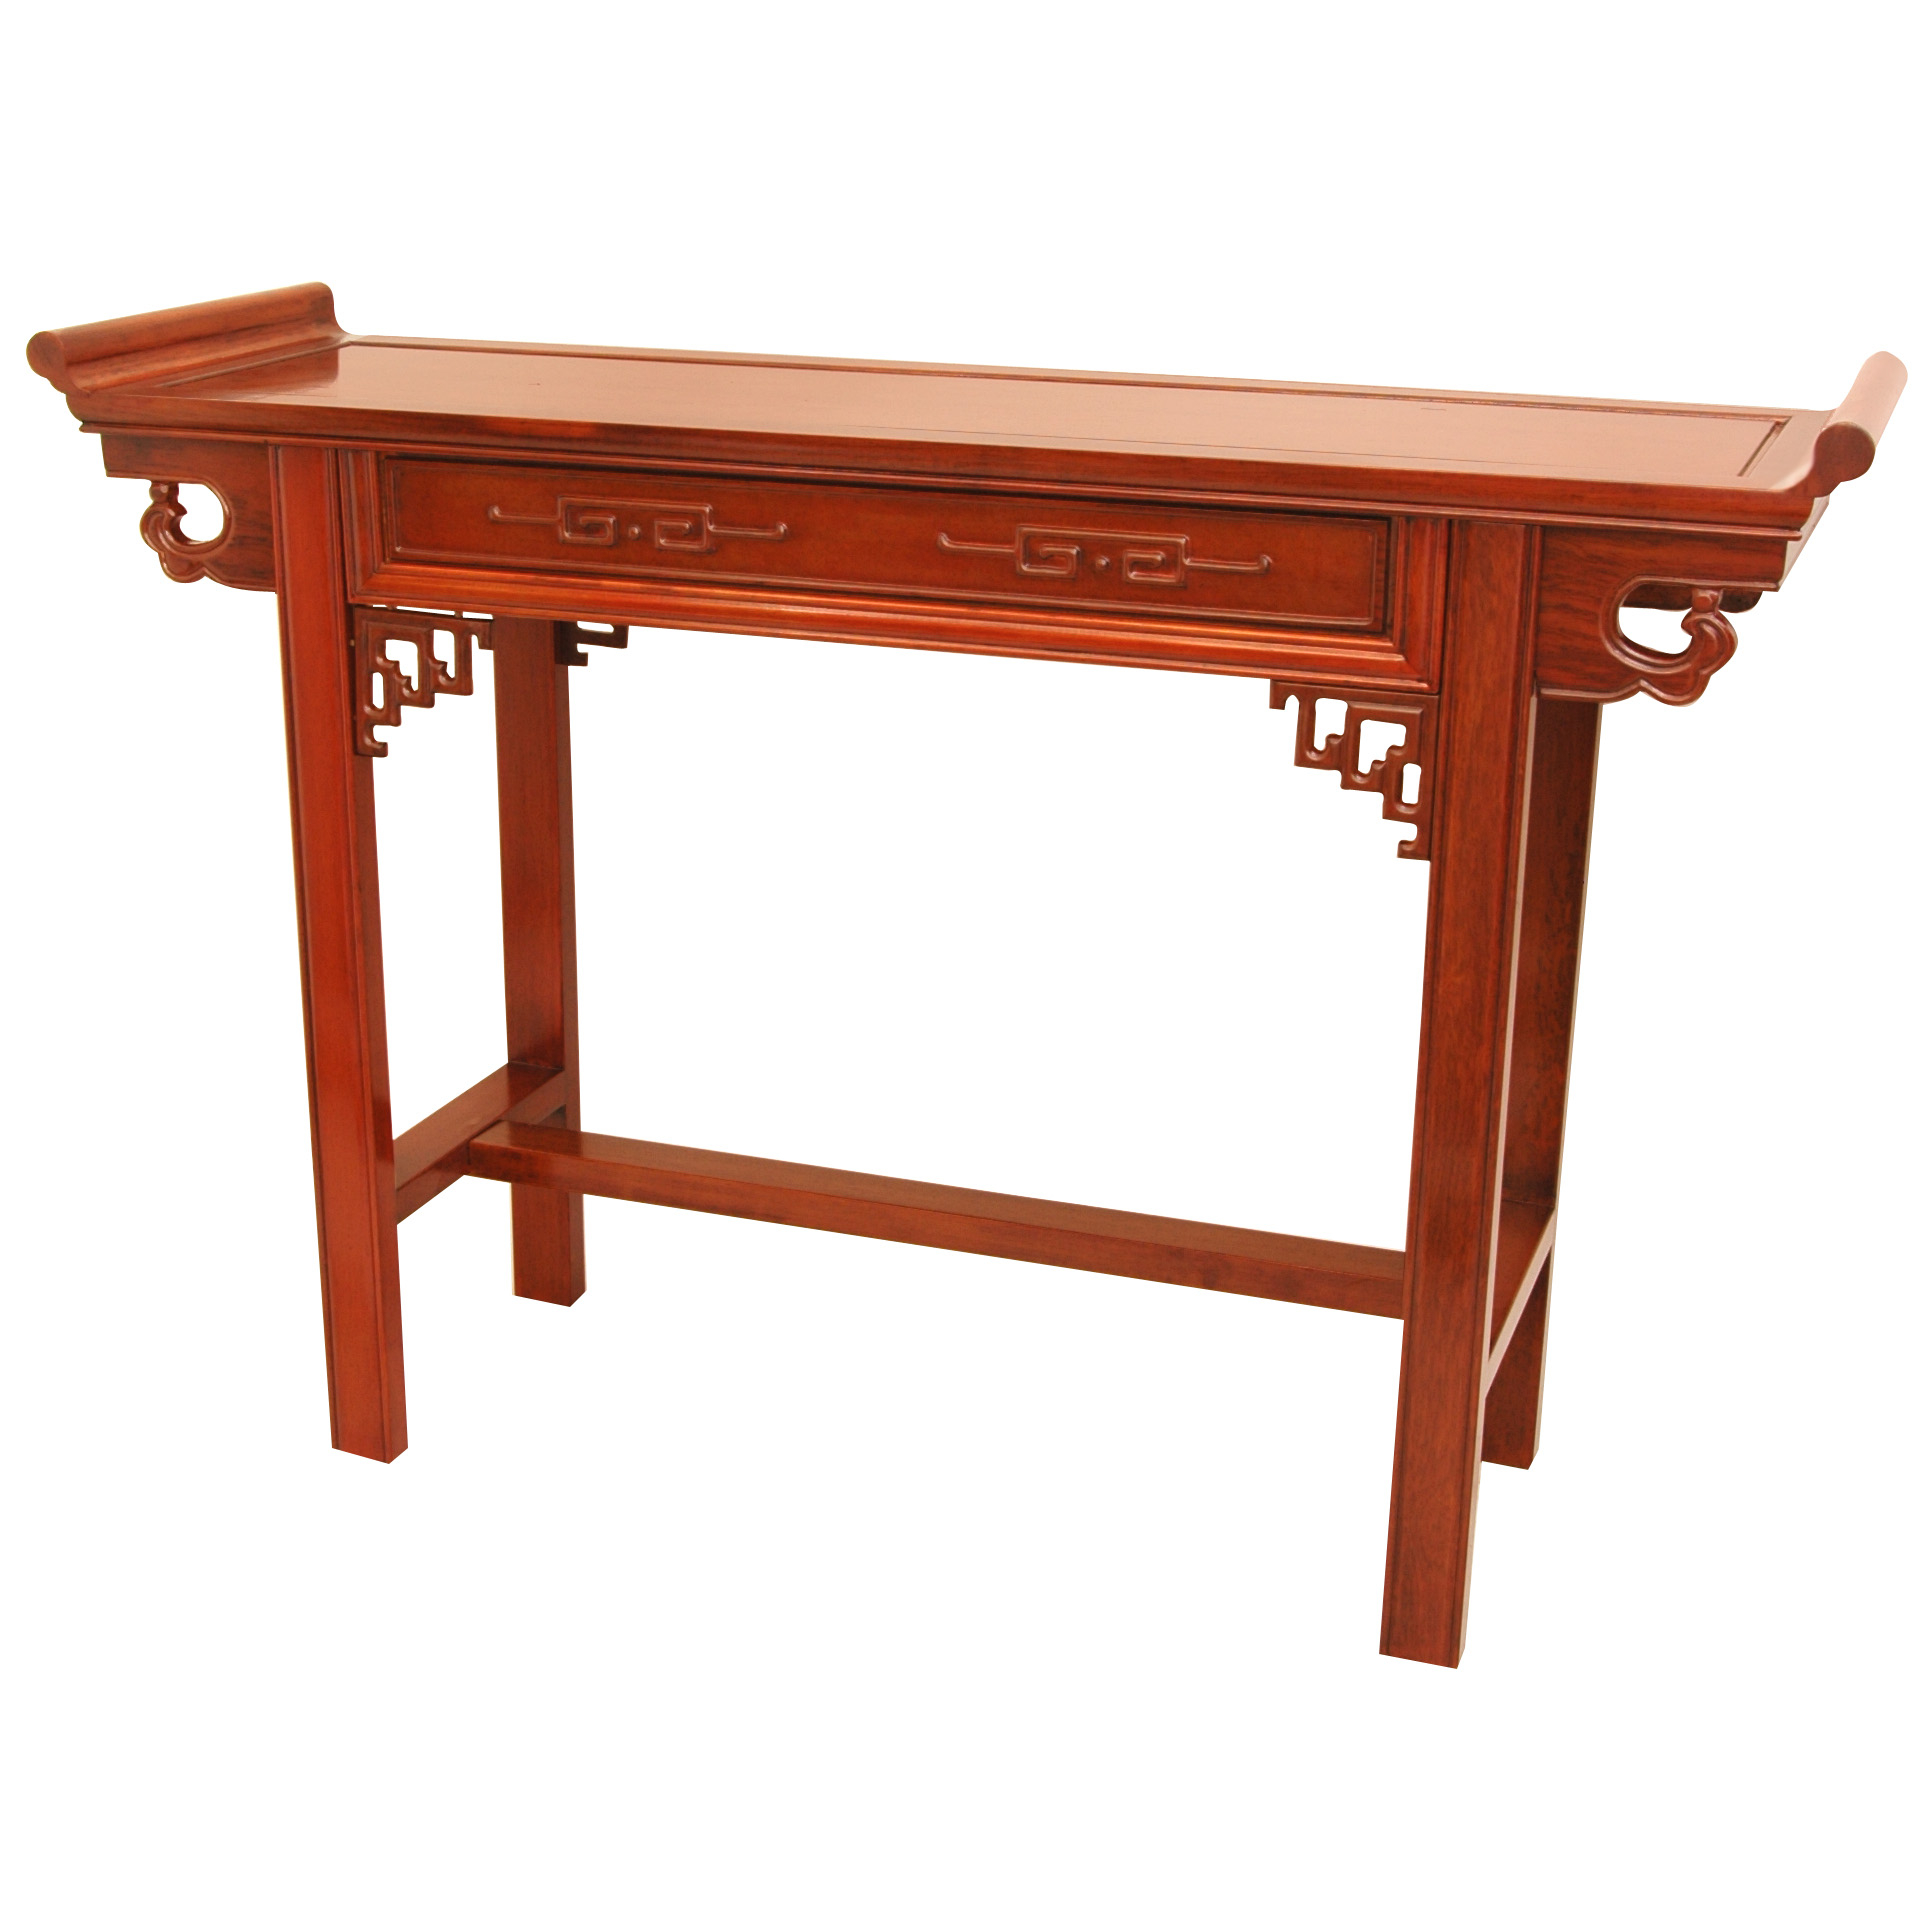 Oriental Furniture Elegant, Stunning, 46-Inch Classic Qing Chinese Rosewood Hall Table, Light Honey Stain